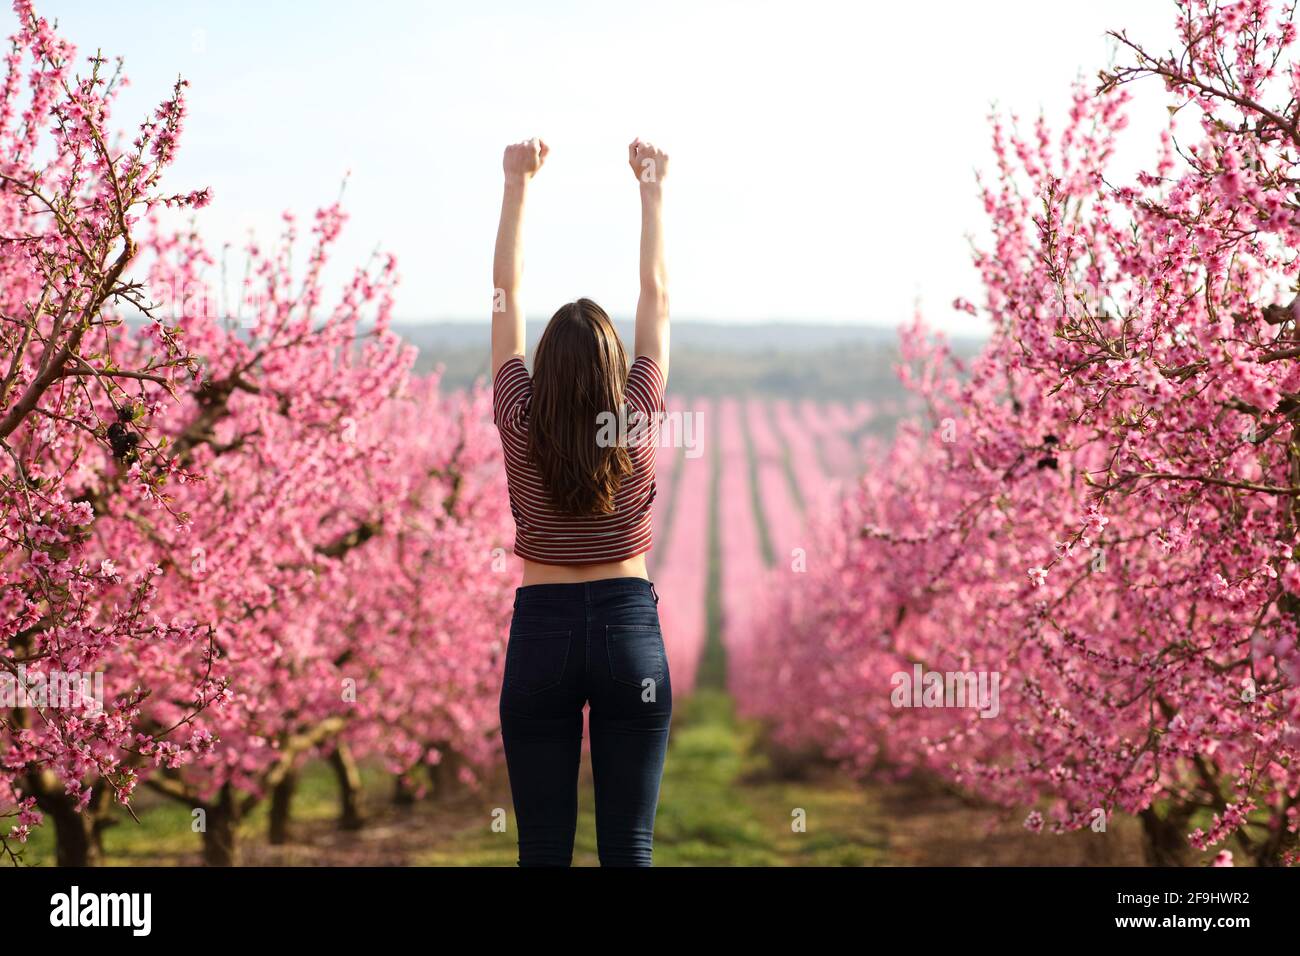 Back view of an excited woman celebrating spring raising arms in a pink flowers field Stock Photo